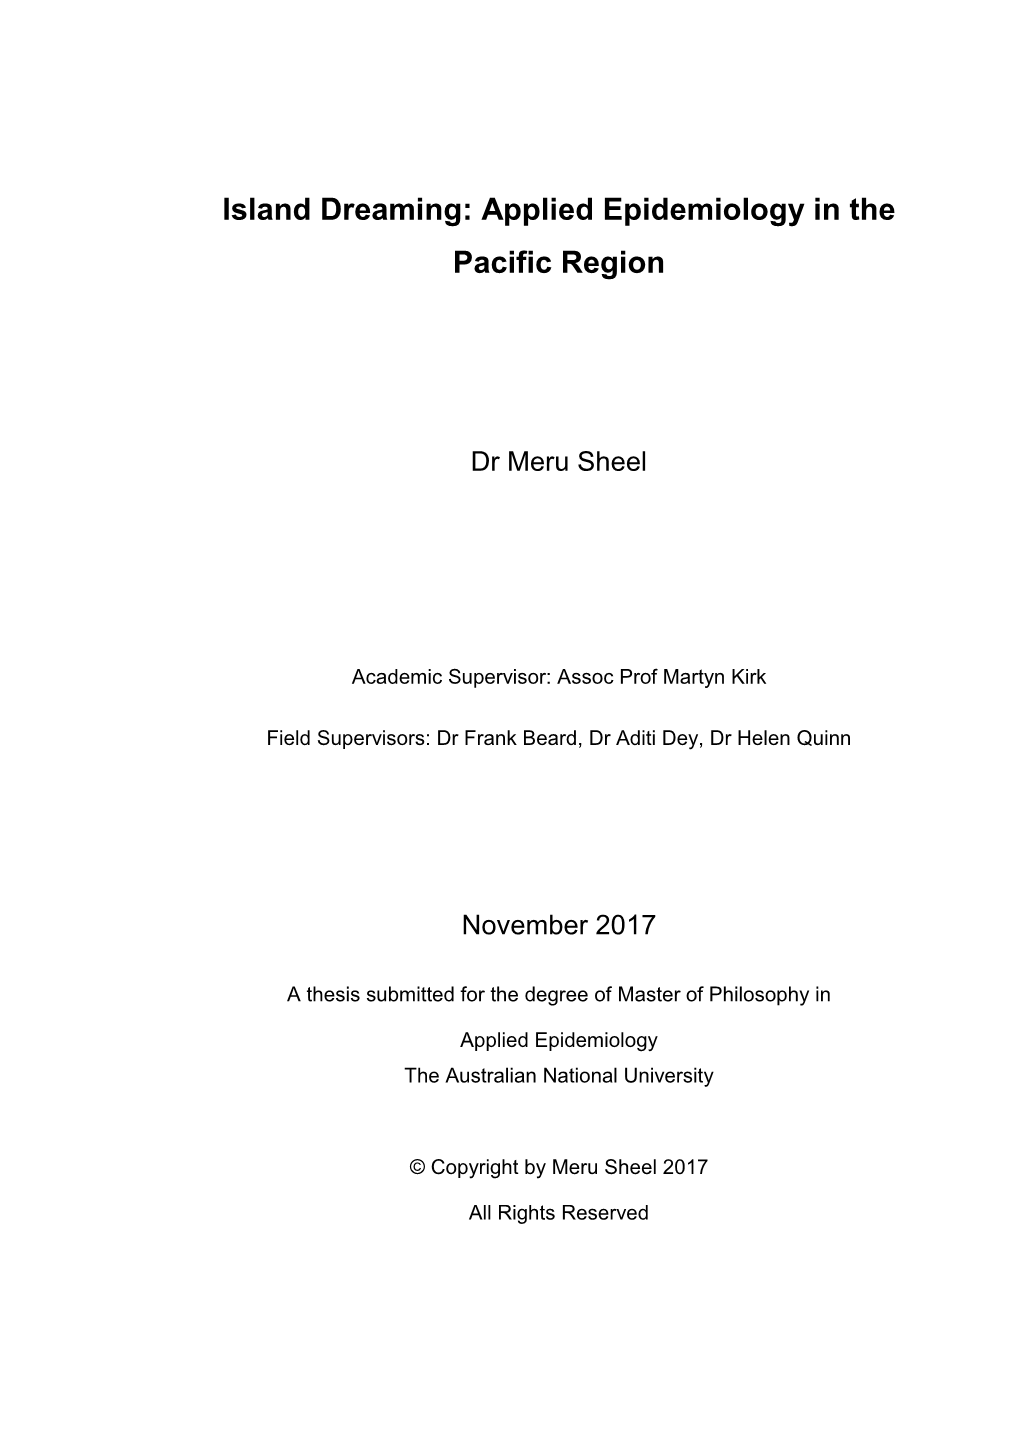 Island Dreaming: Applied Epidemiology in the Pacific Region